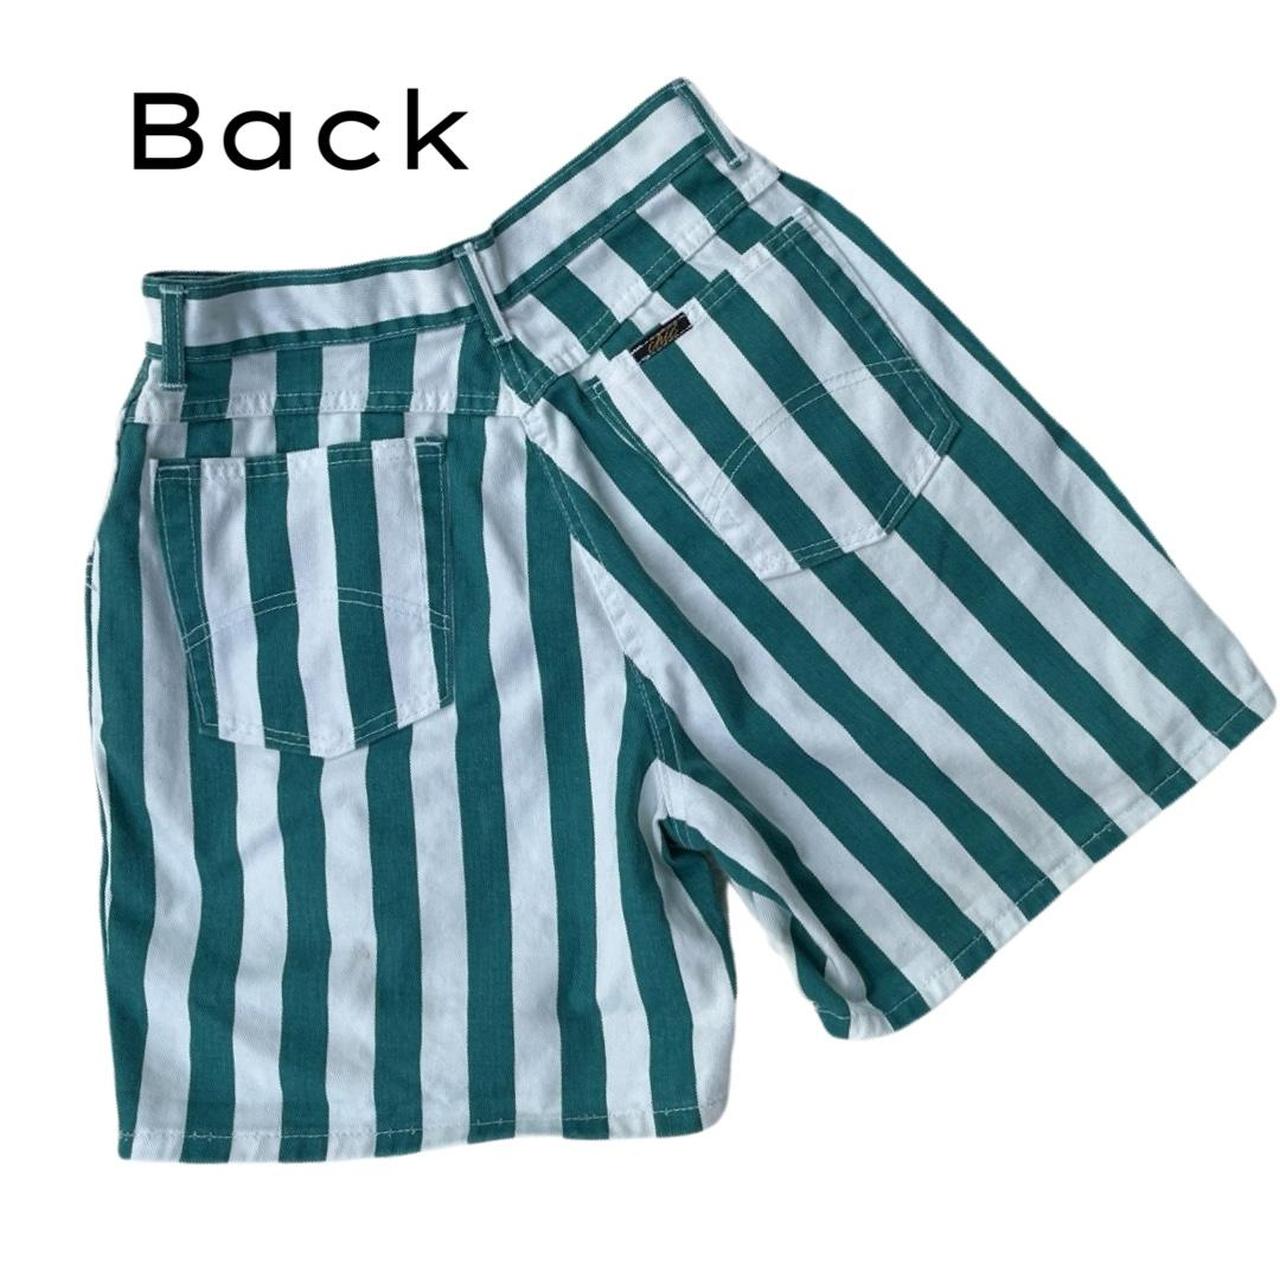 Chic Women's Green and White Shorts (5)